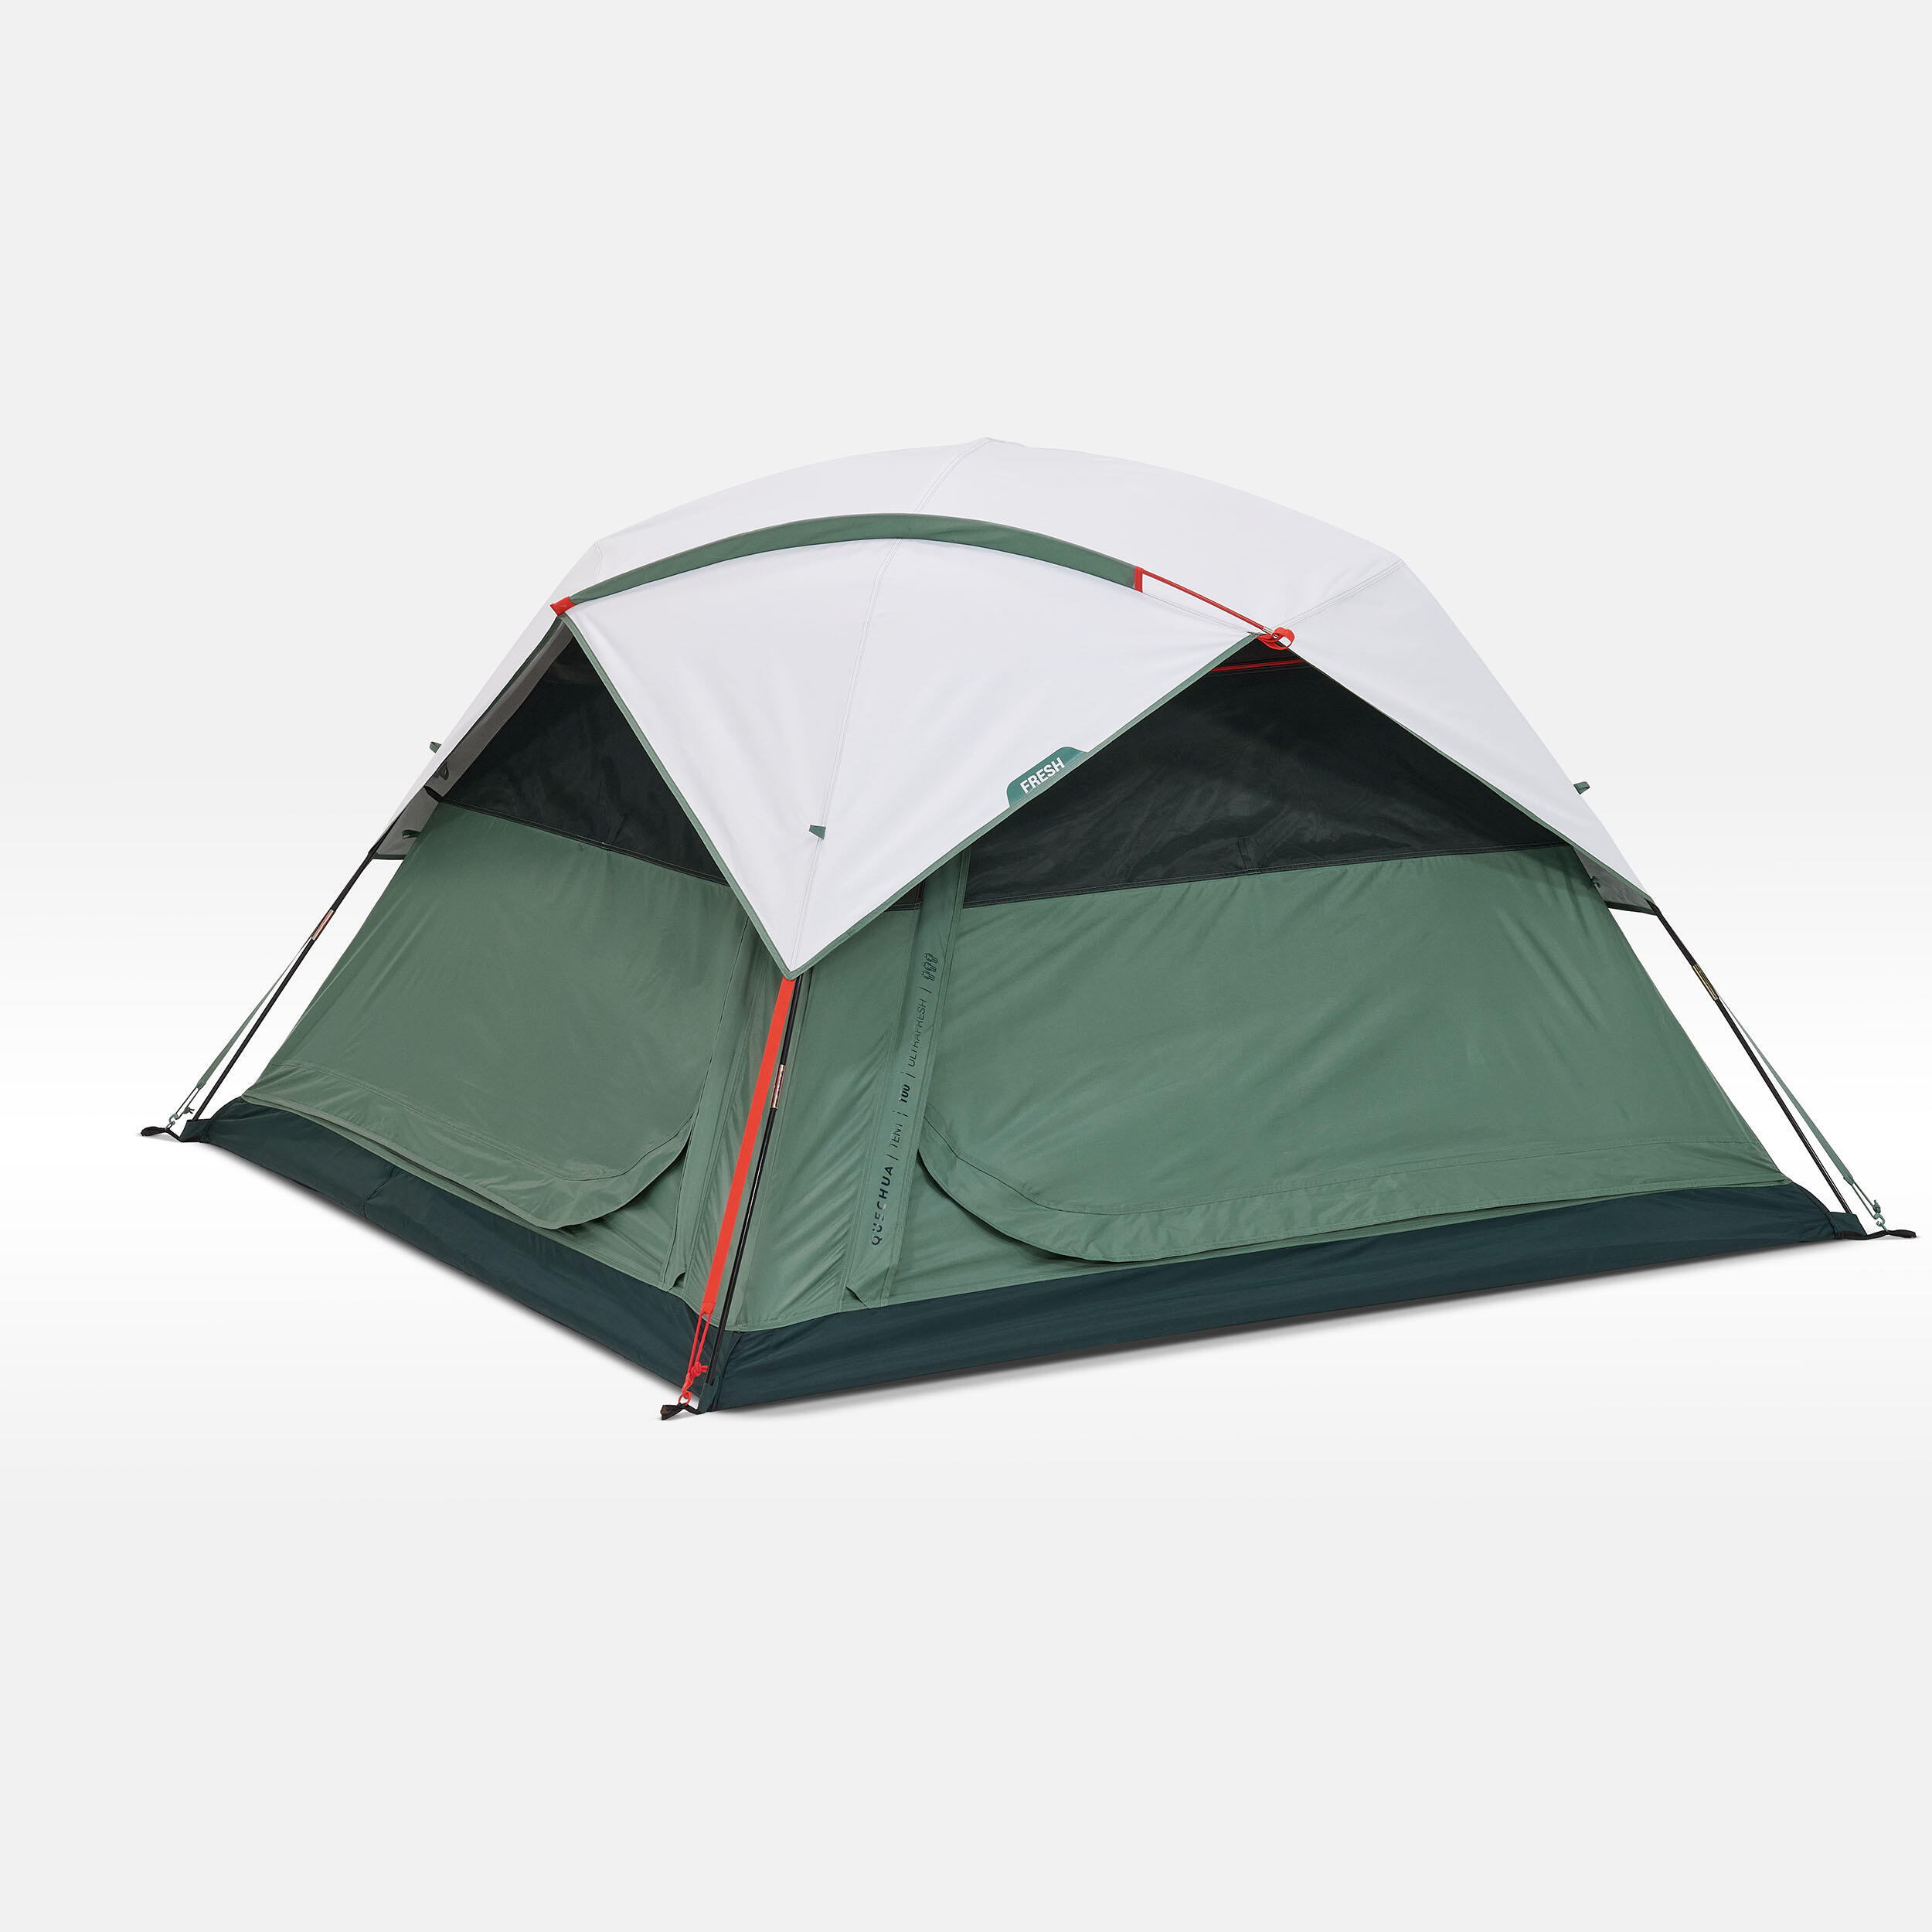 Camping tent - MH100  - 3-person - Fresh 22/24